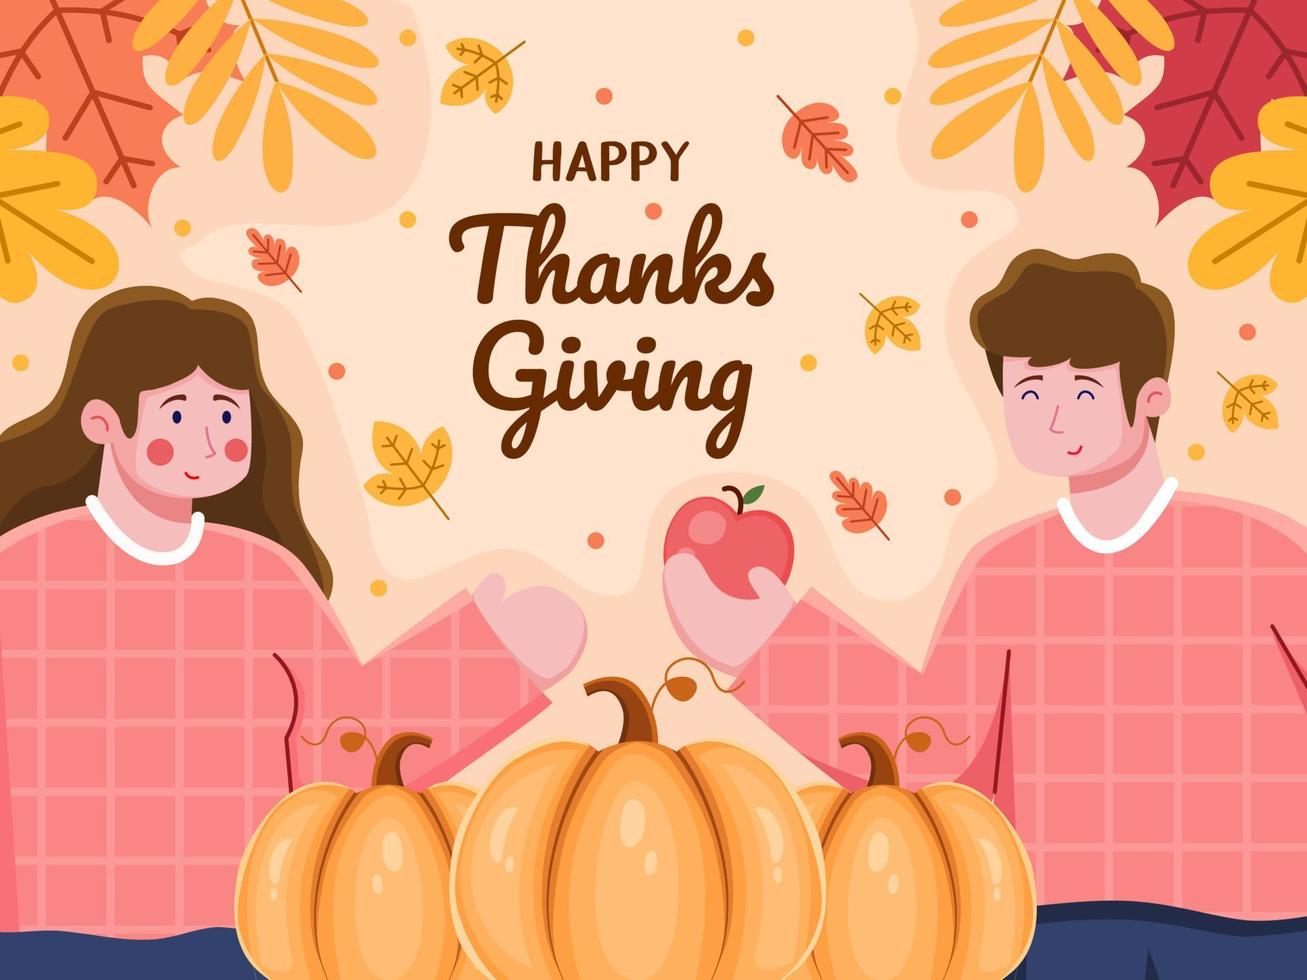 Illustration of People Celebrating Thanks Giving Day Together. Happy thanksgiving day. Give thanks. Can be used for greeting card, postcard, banner, postcard, print, web, etc. vector